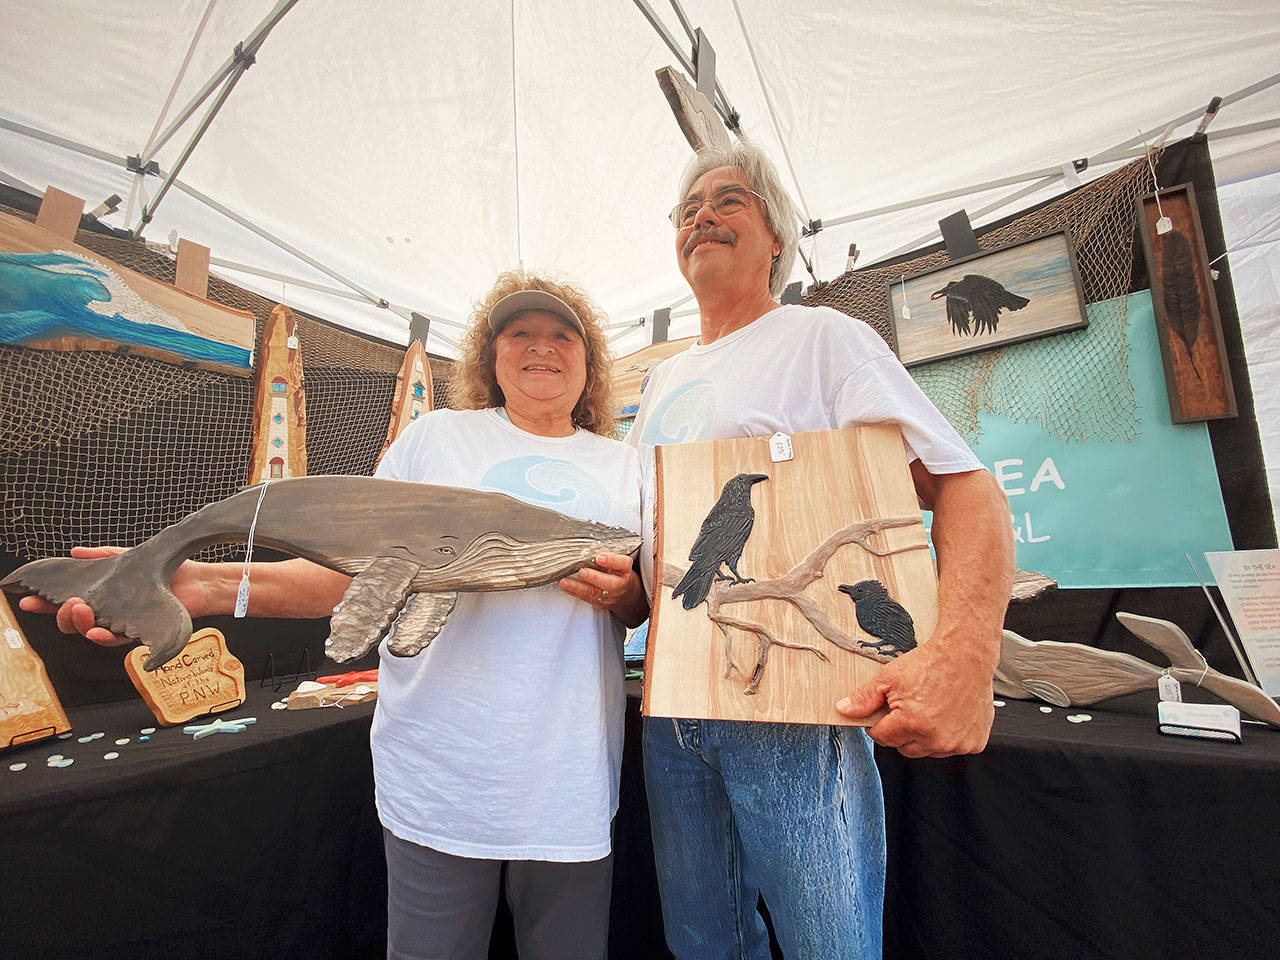 Linda and Larry Gonzalez, display some of their By the Sea Original Artwork creations at the SequiM Farmers & Artisans Market Saturday.